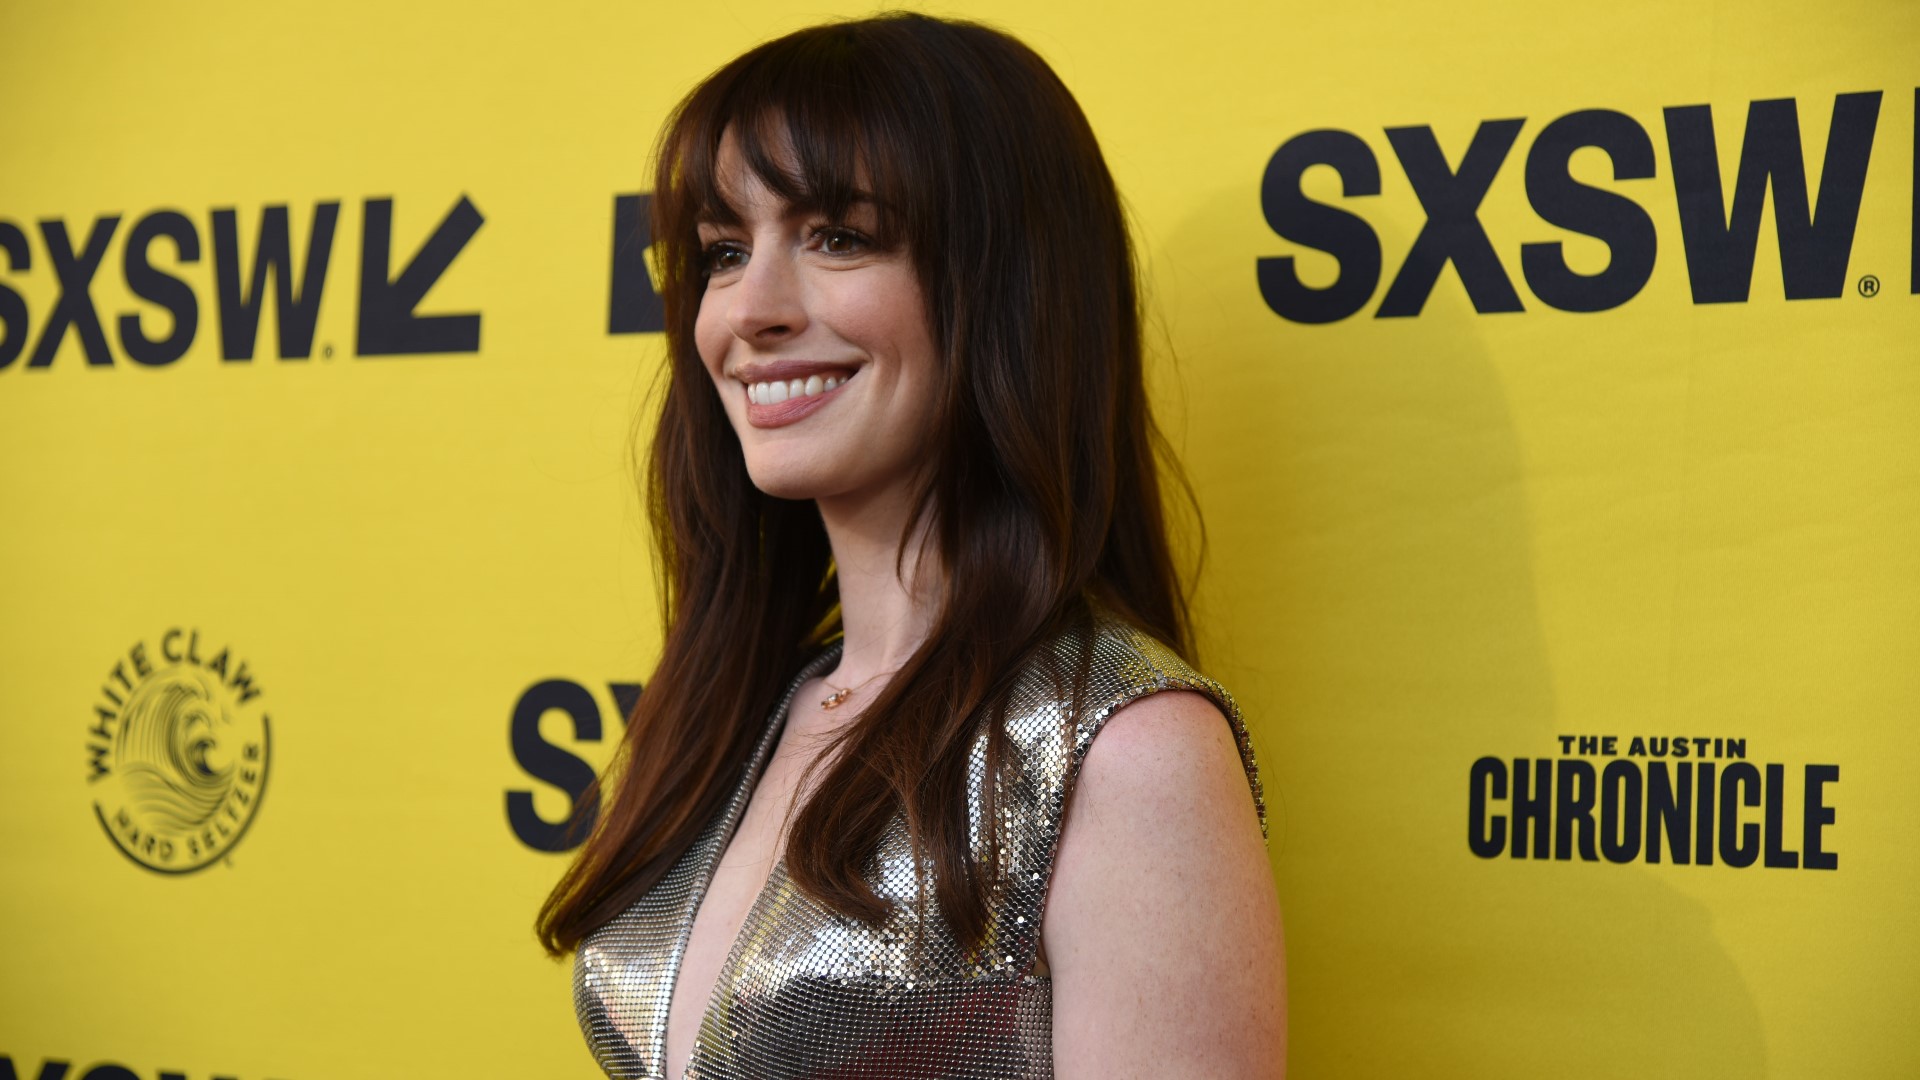 Many big names are in Austin this week for releases of new movies and shows, including Anne Hathaway, Sandra Bullock, Jared Leto and more.